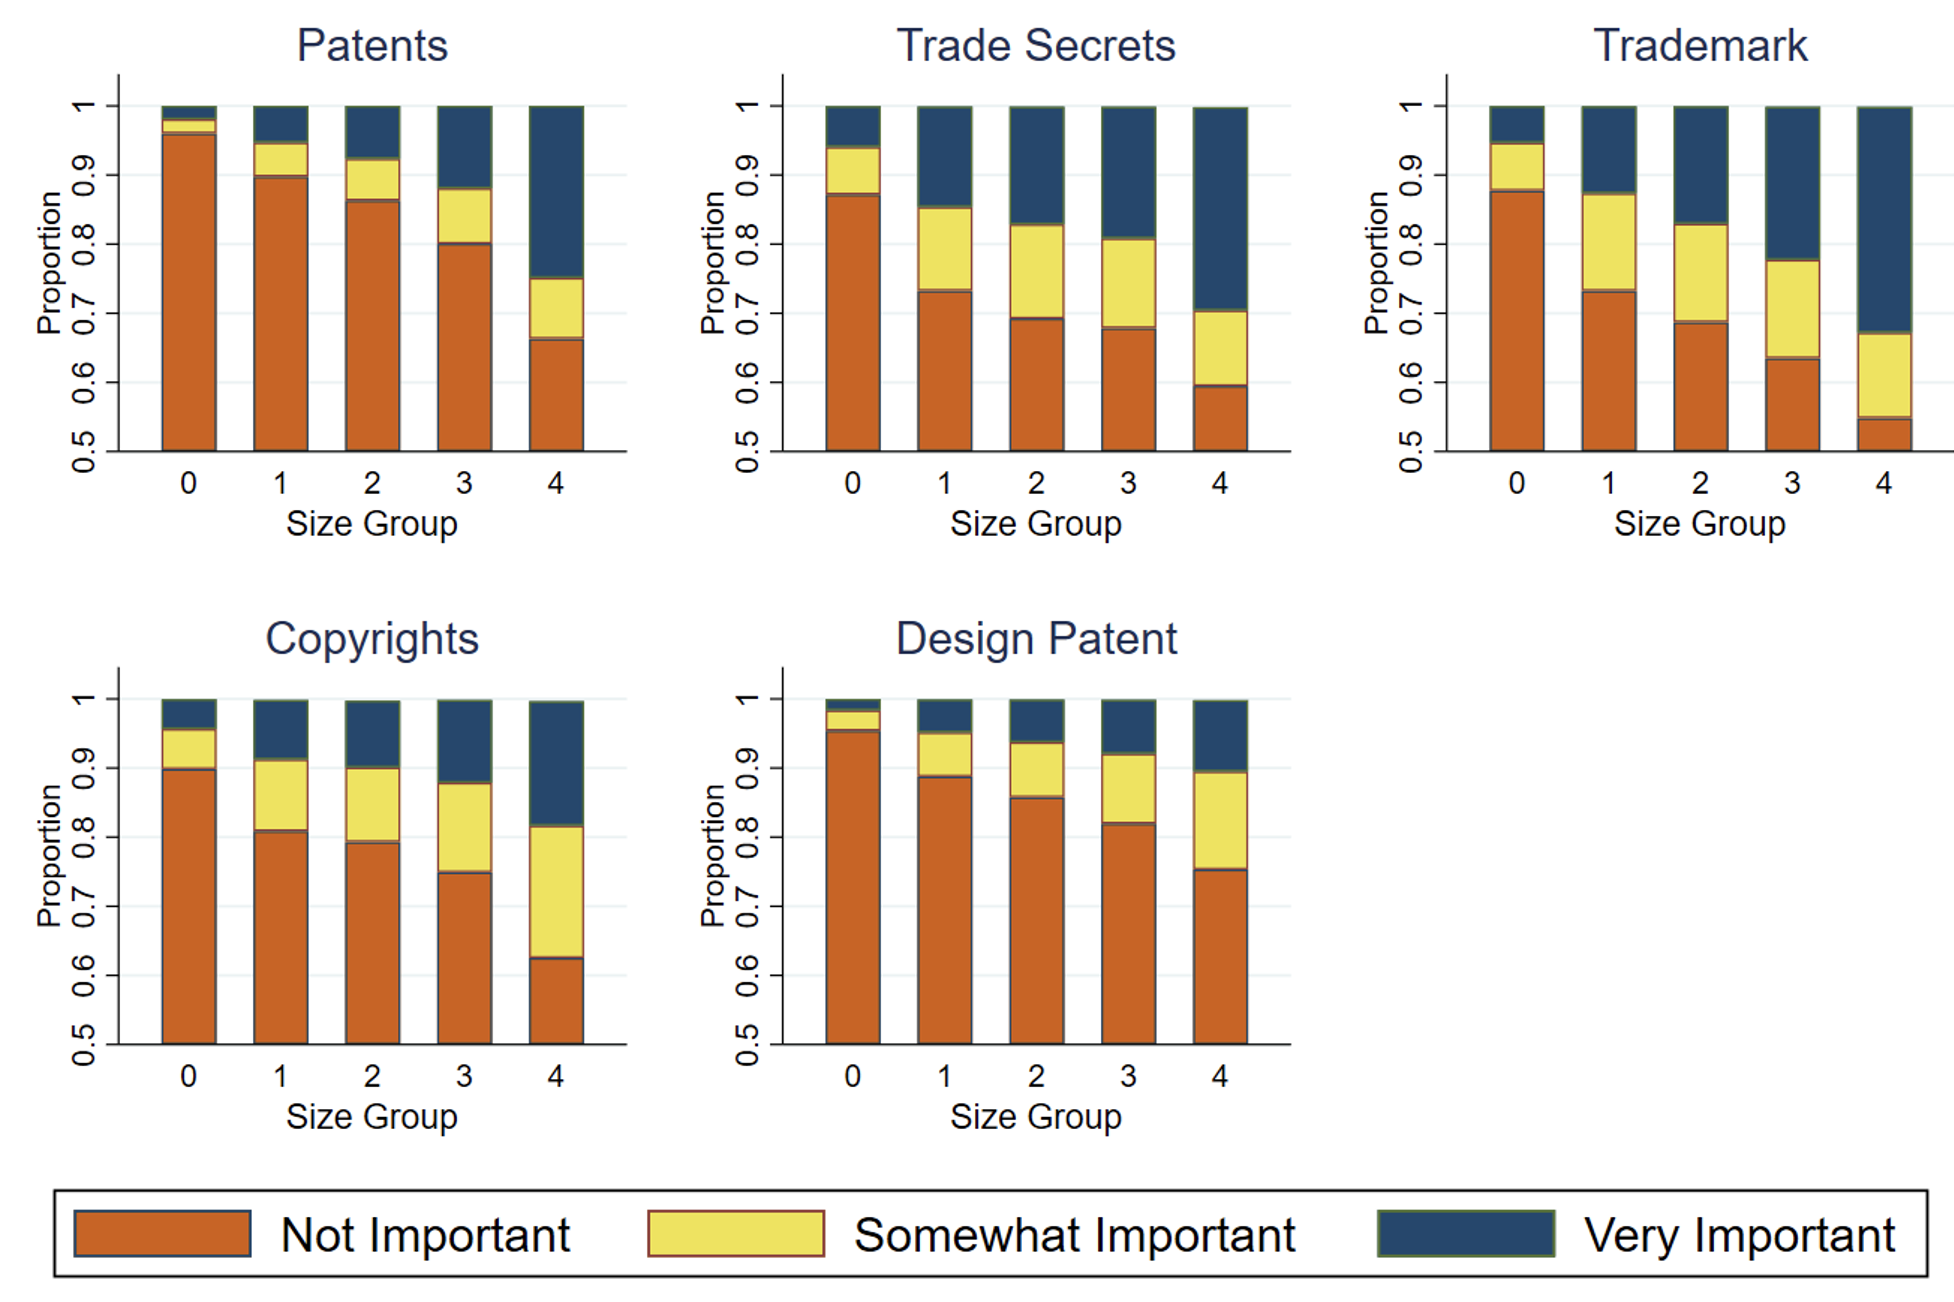 Figure 4 Importance of different IP protection strategies by firm size group